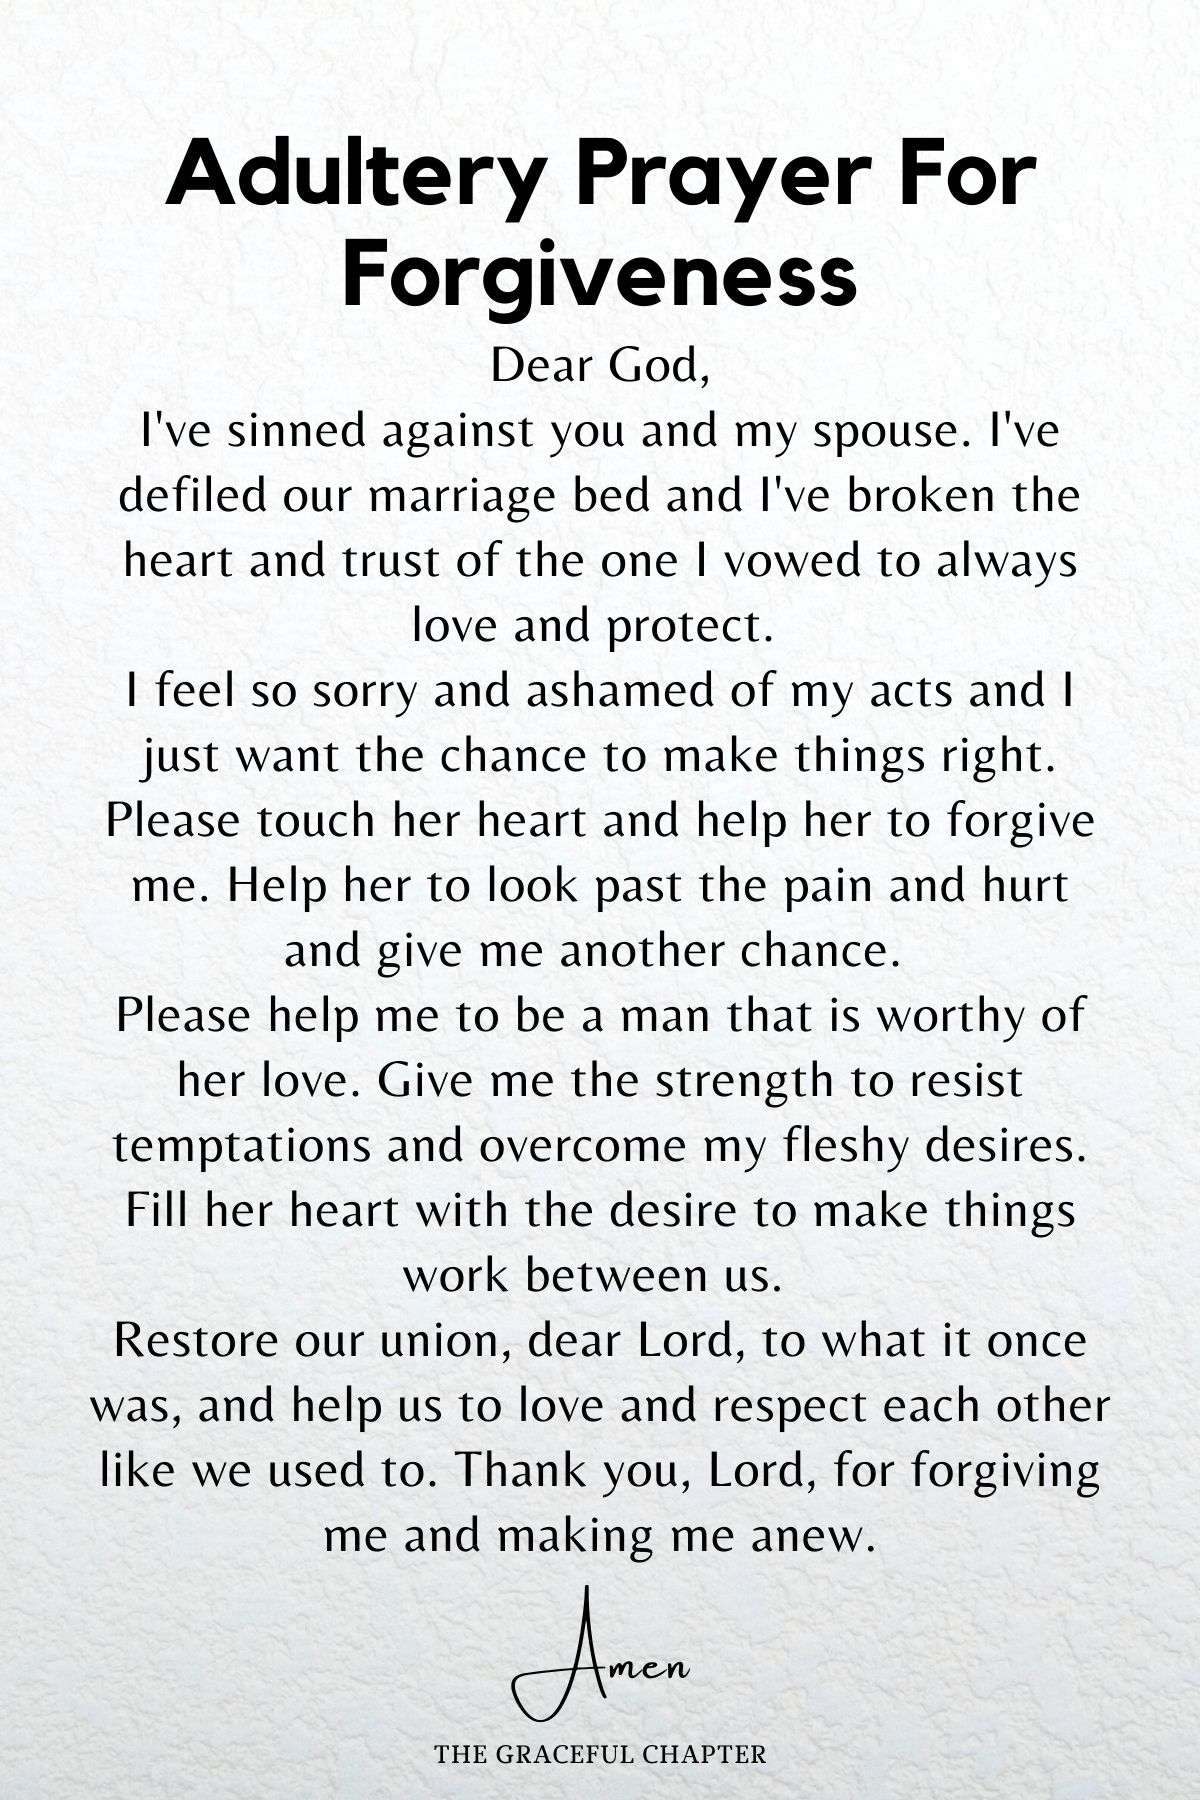 Adultery prayer for forgiveness